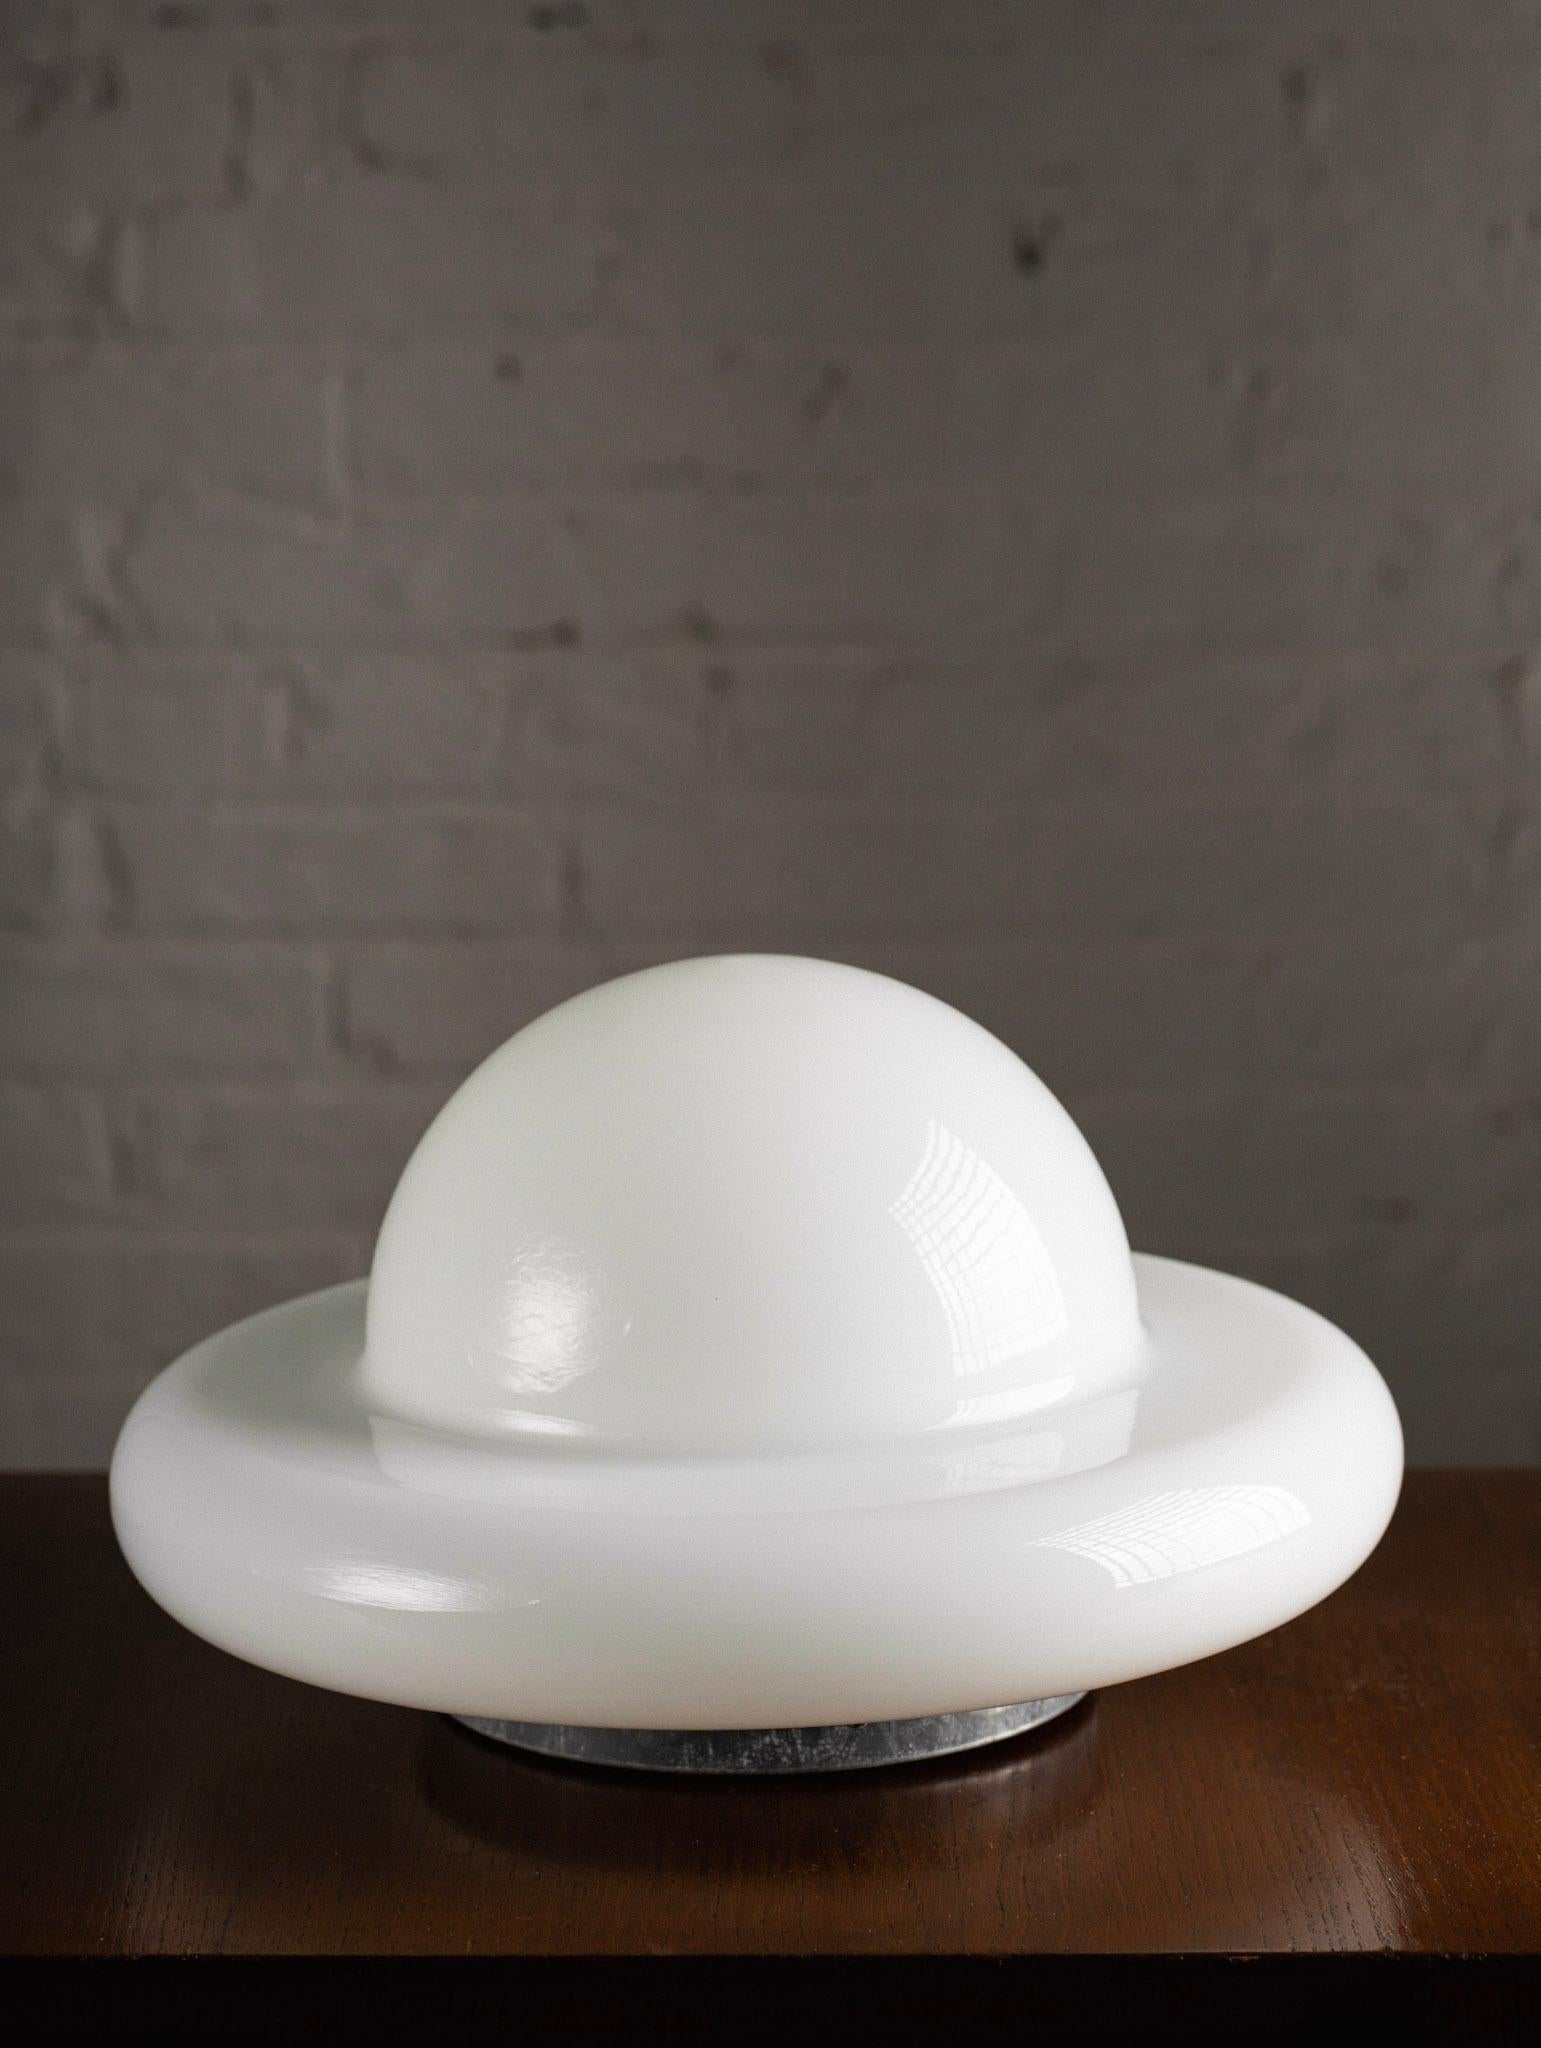 A white Murano glass lamp. Mushroom or saucer silhouette on a nickel base. May also be hung as a sconce or flush mount ceiling light. Sourced outside of Florence, Italy.